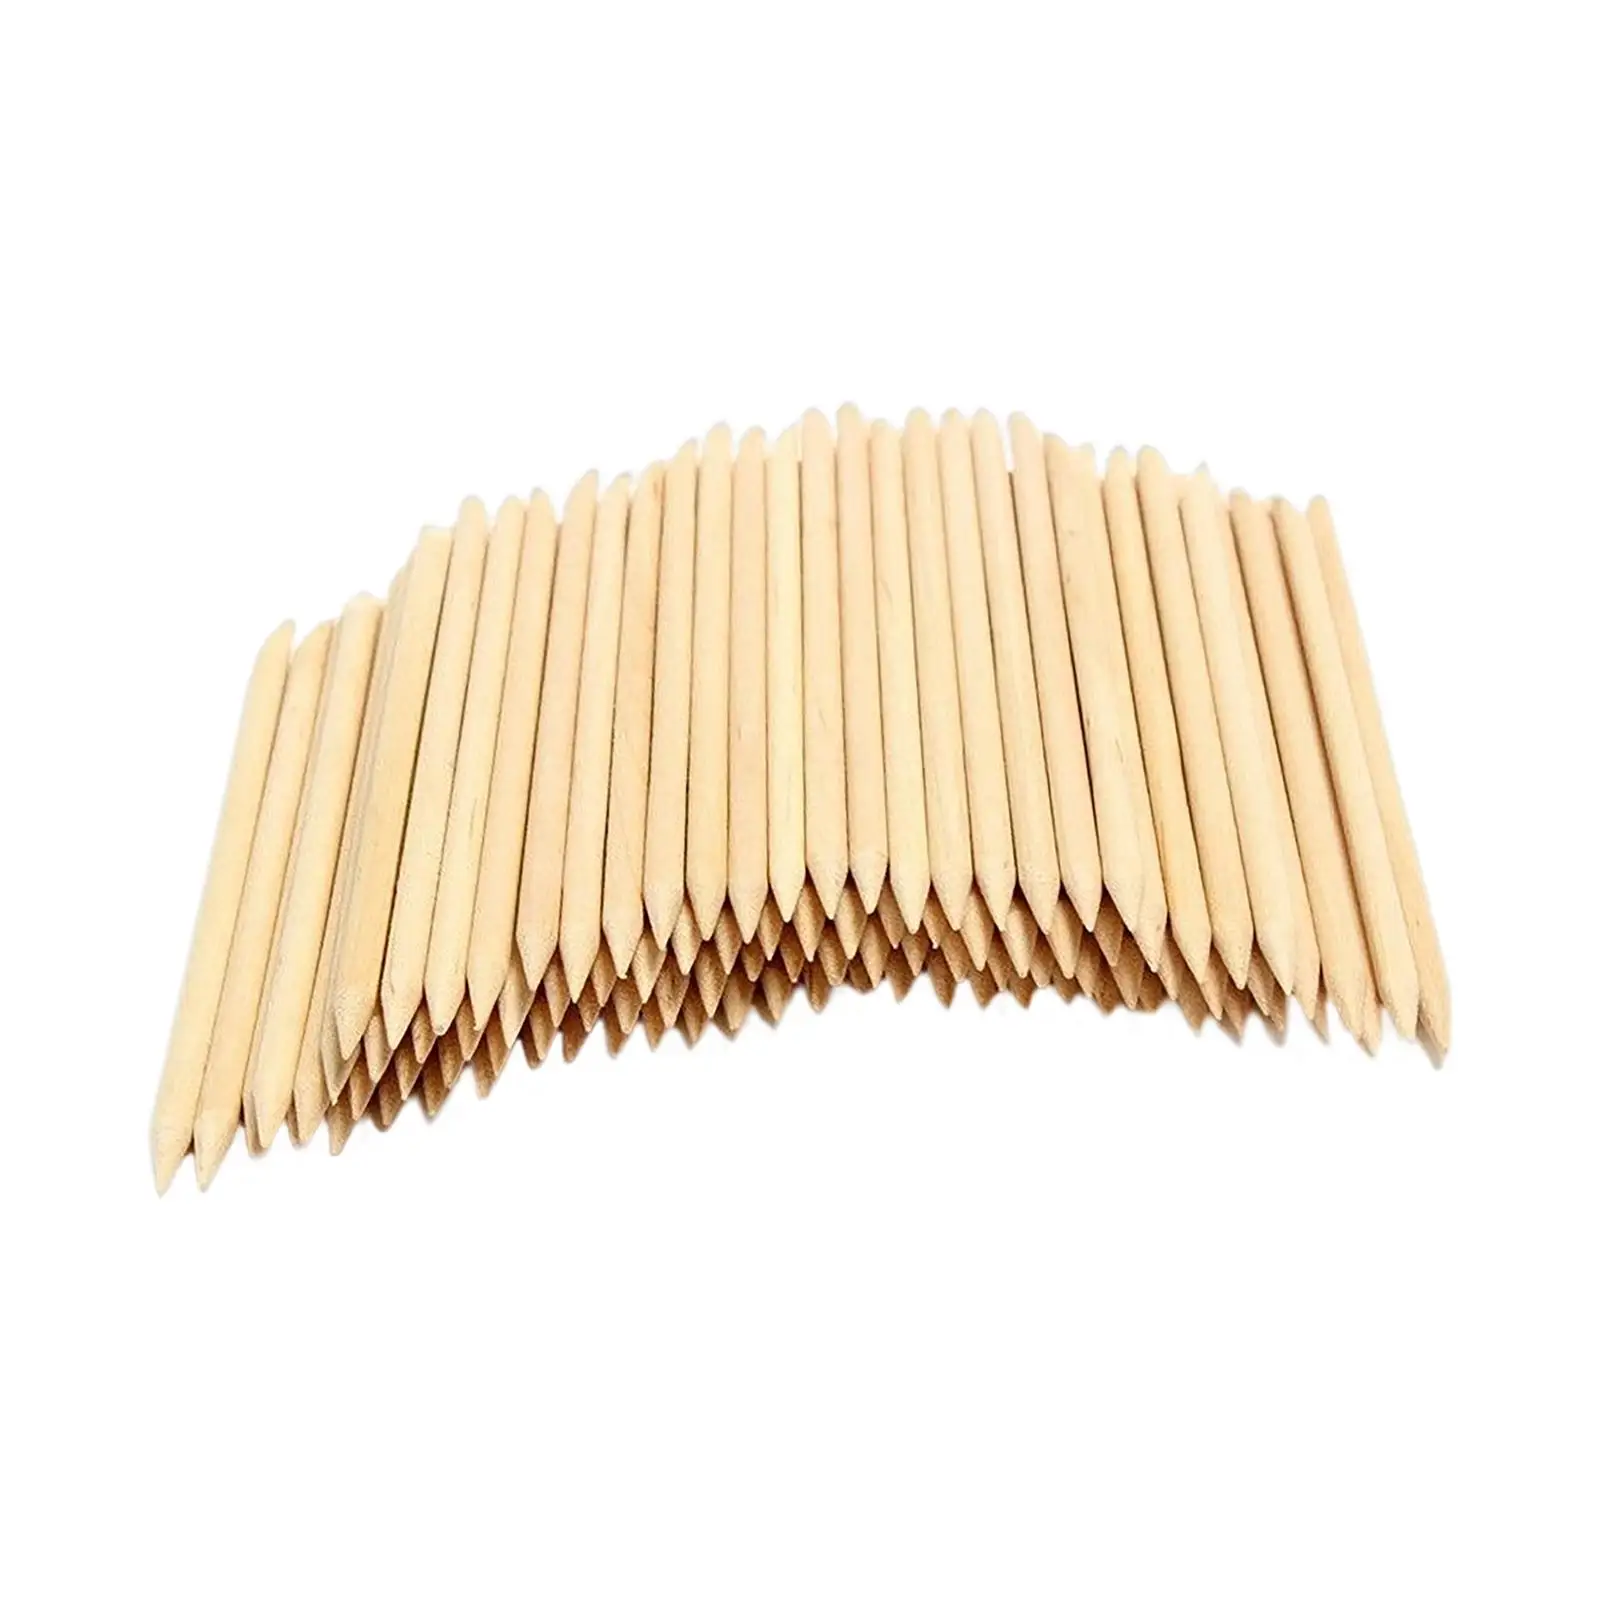 100x Orange Wooden Sticks, Manicure Supplies Nail Cuticle Pusher, for Nails Everyday Use